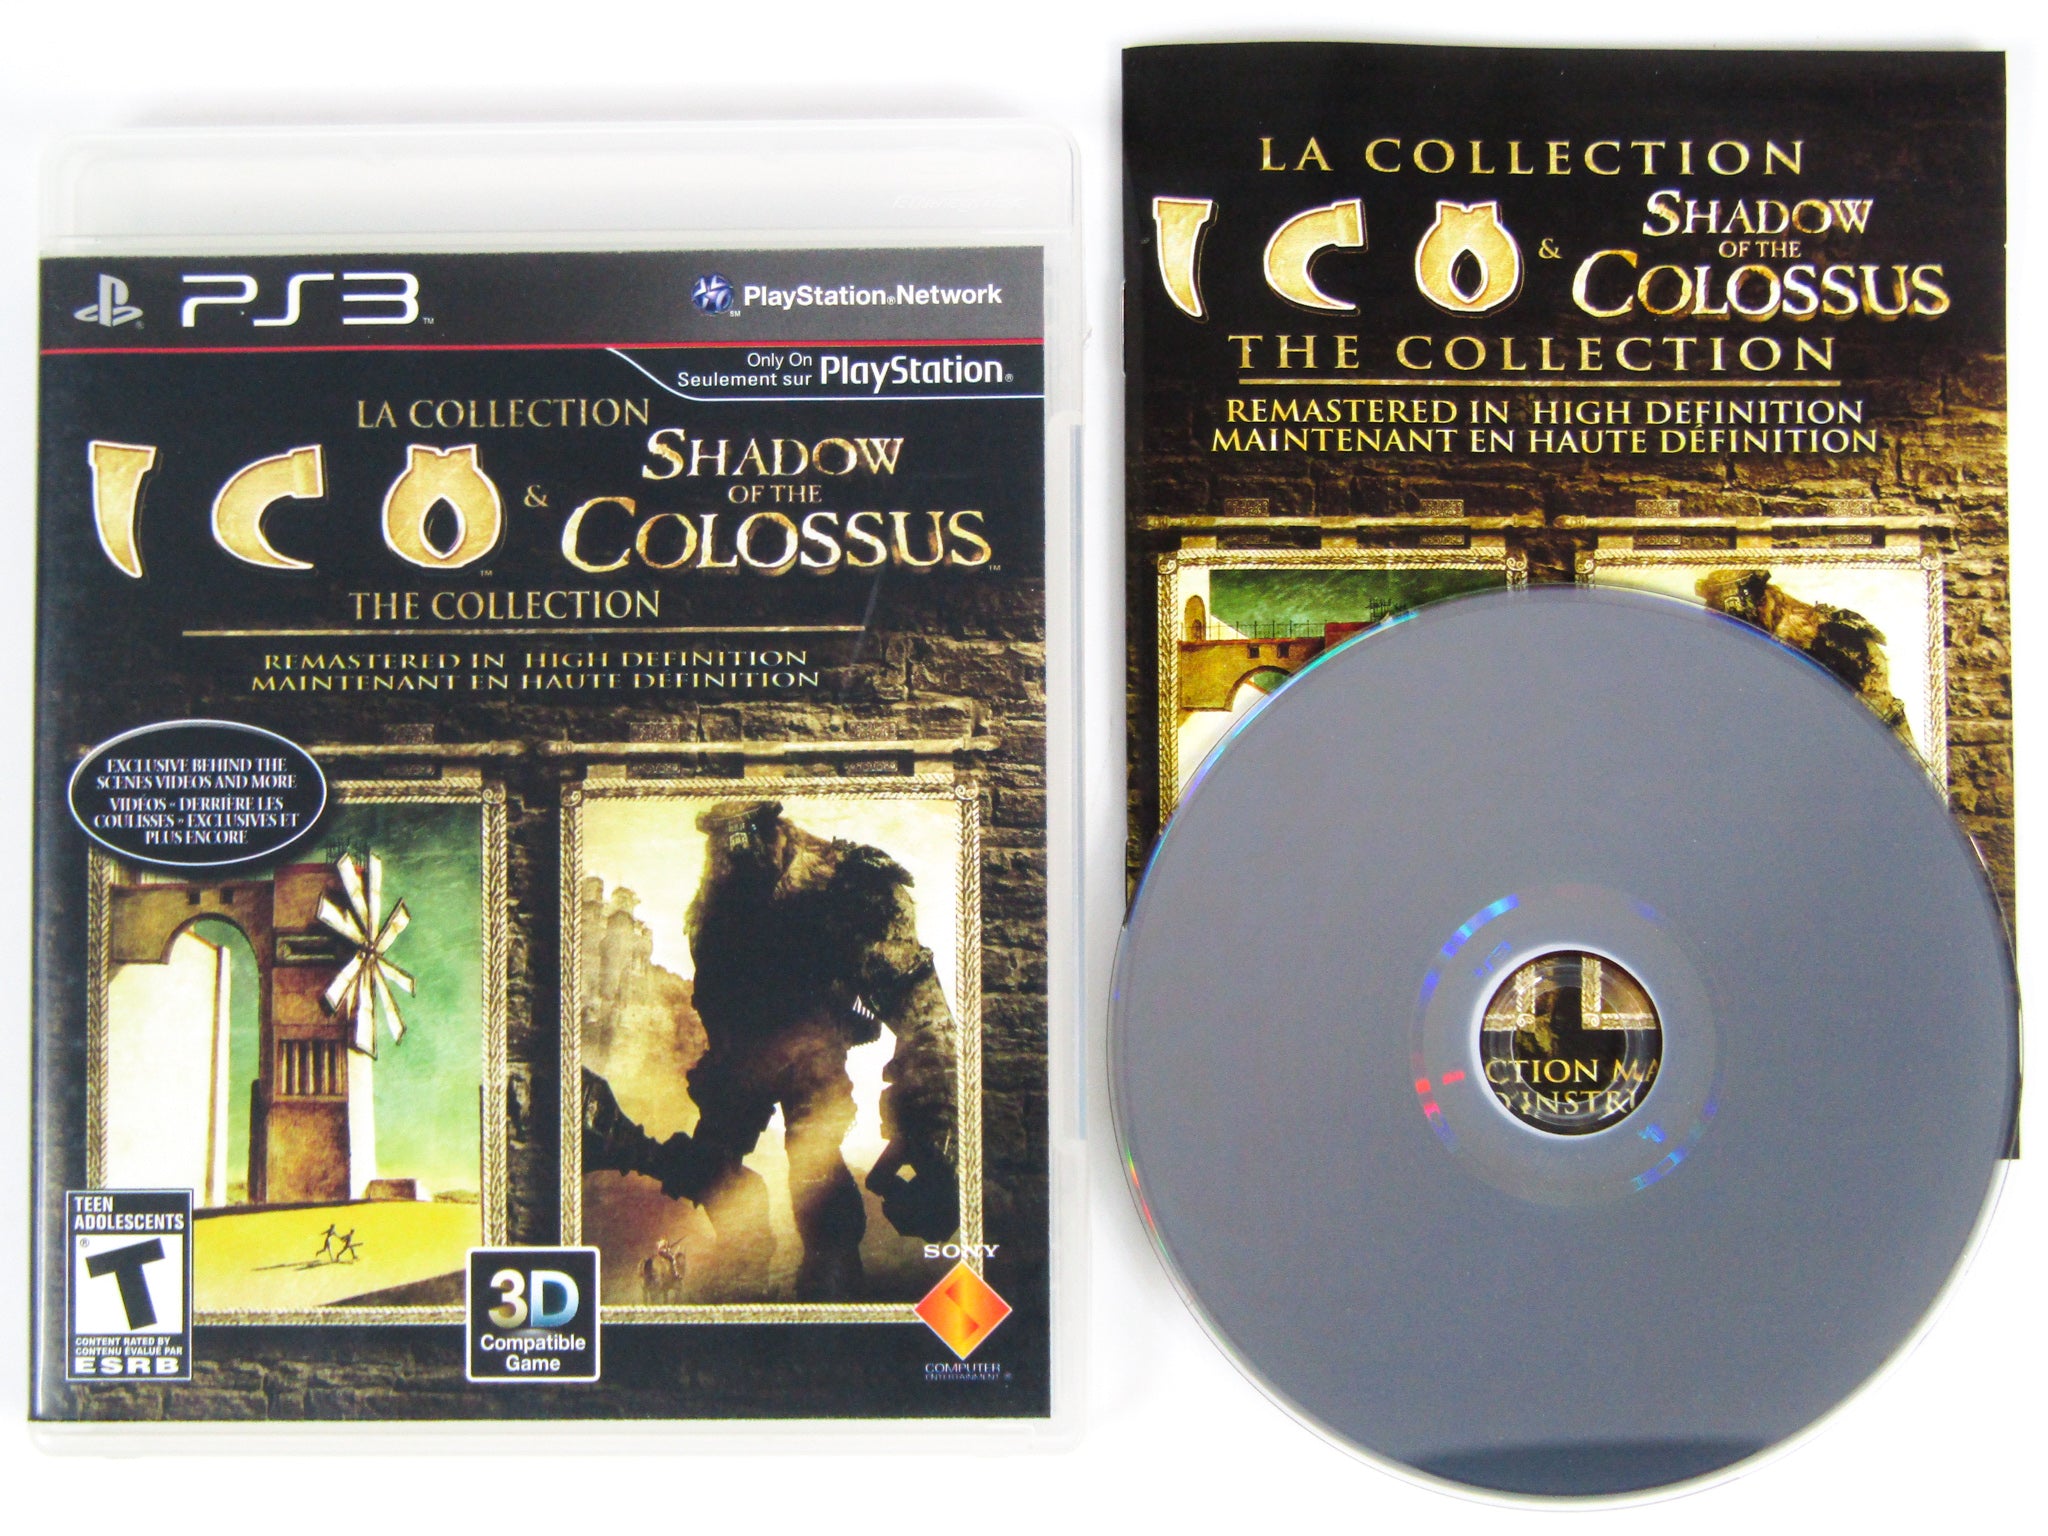 PCSX2 VS PS3] Ico PCSX2 VS The Ico & Shadow of the Colossus Collection PS3  2K 60fps 